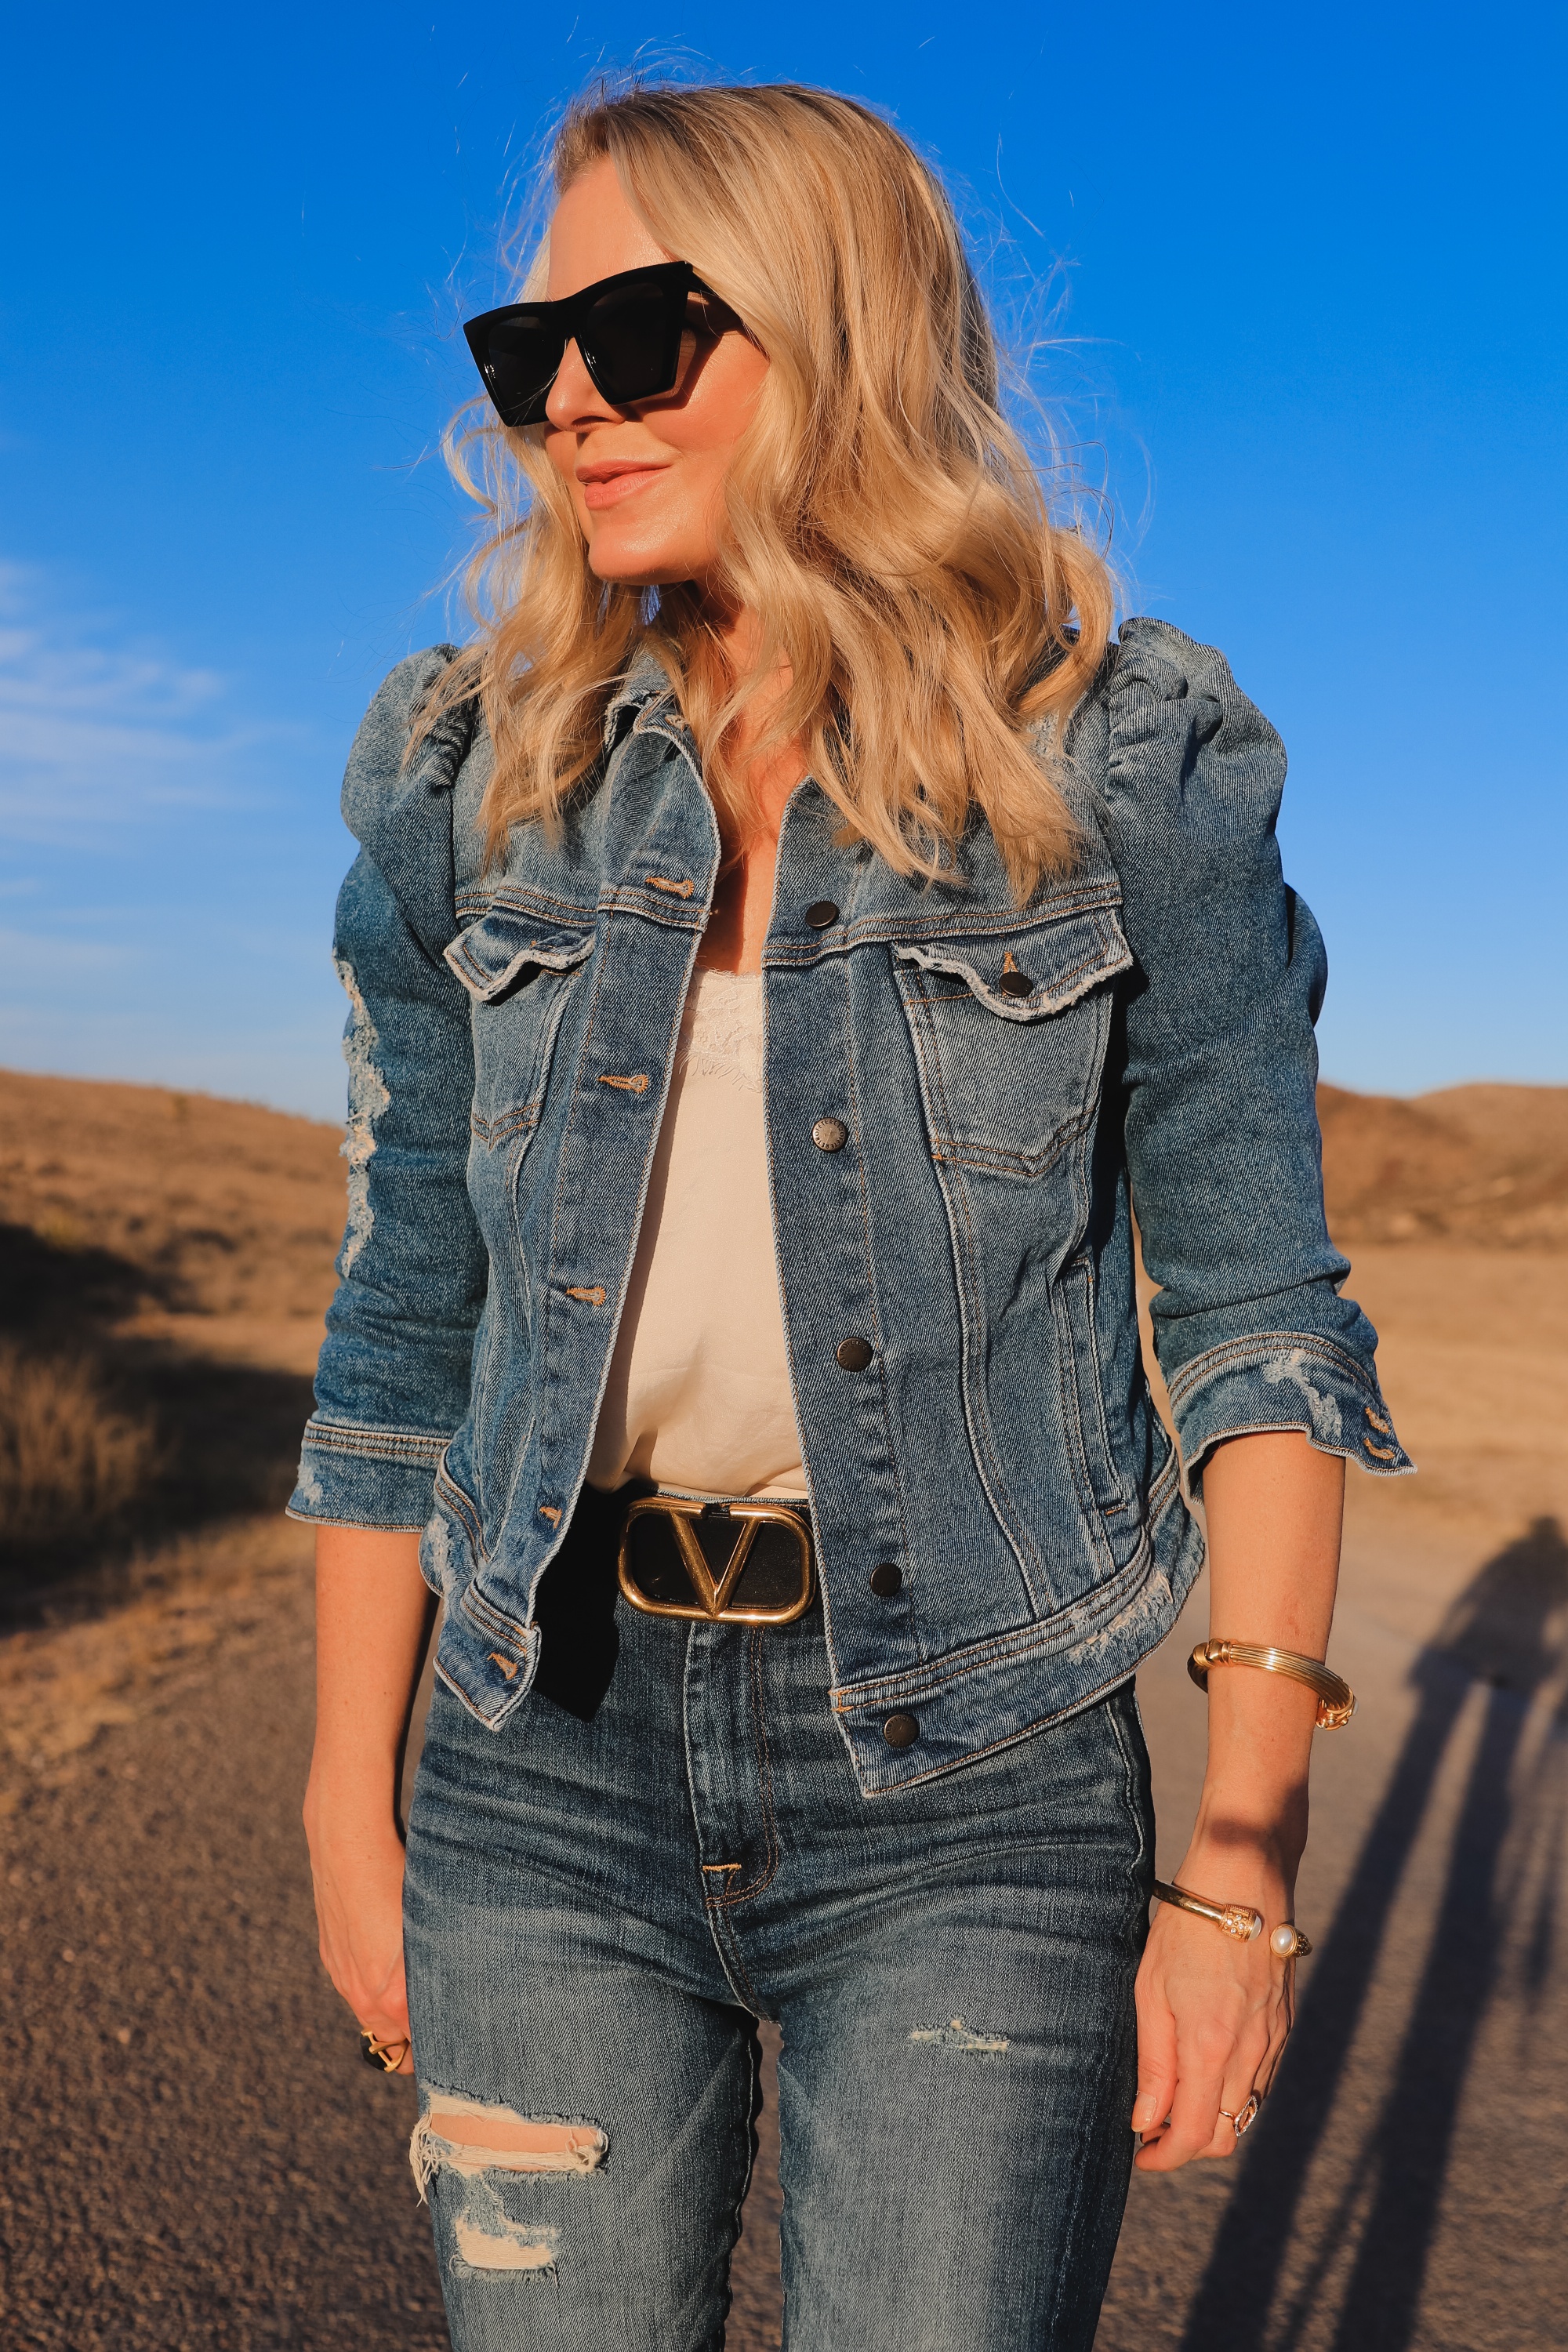 How To Wear Denim on Denim, Erin Busbee of Busbee wearing a distressed puff sleeve denim jacket by Retrofete, 7 For All Mankind distressed jeans, black Alexander Wang cutout booties, white B.P. lace cami, black cat eye sunglasses, and Julie Vos gold cuff bracelets in West Texas